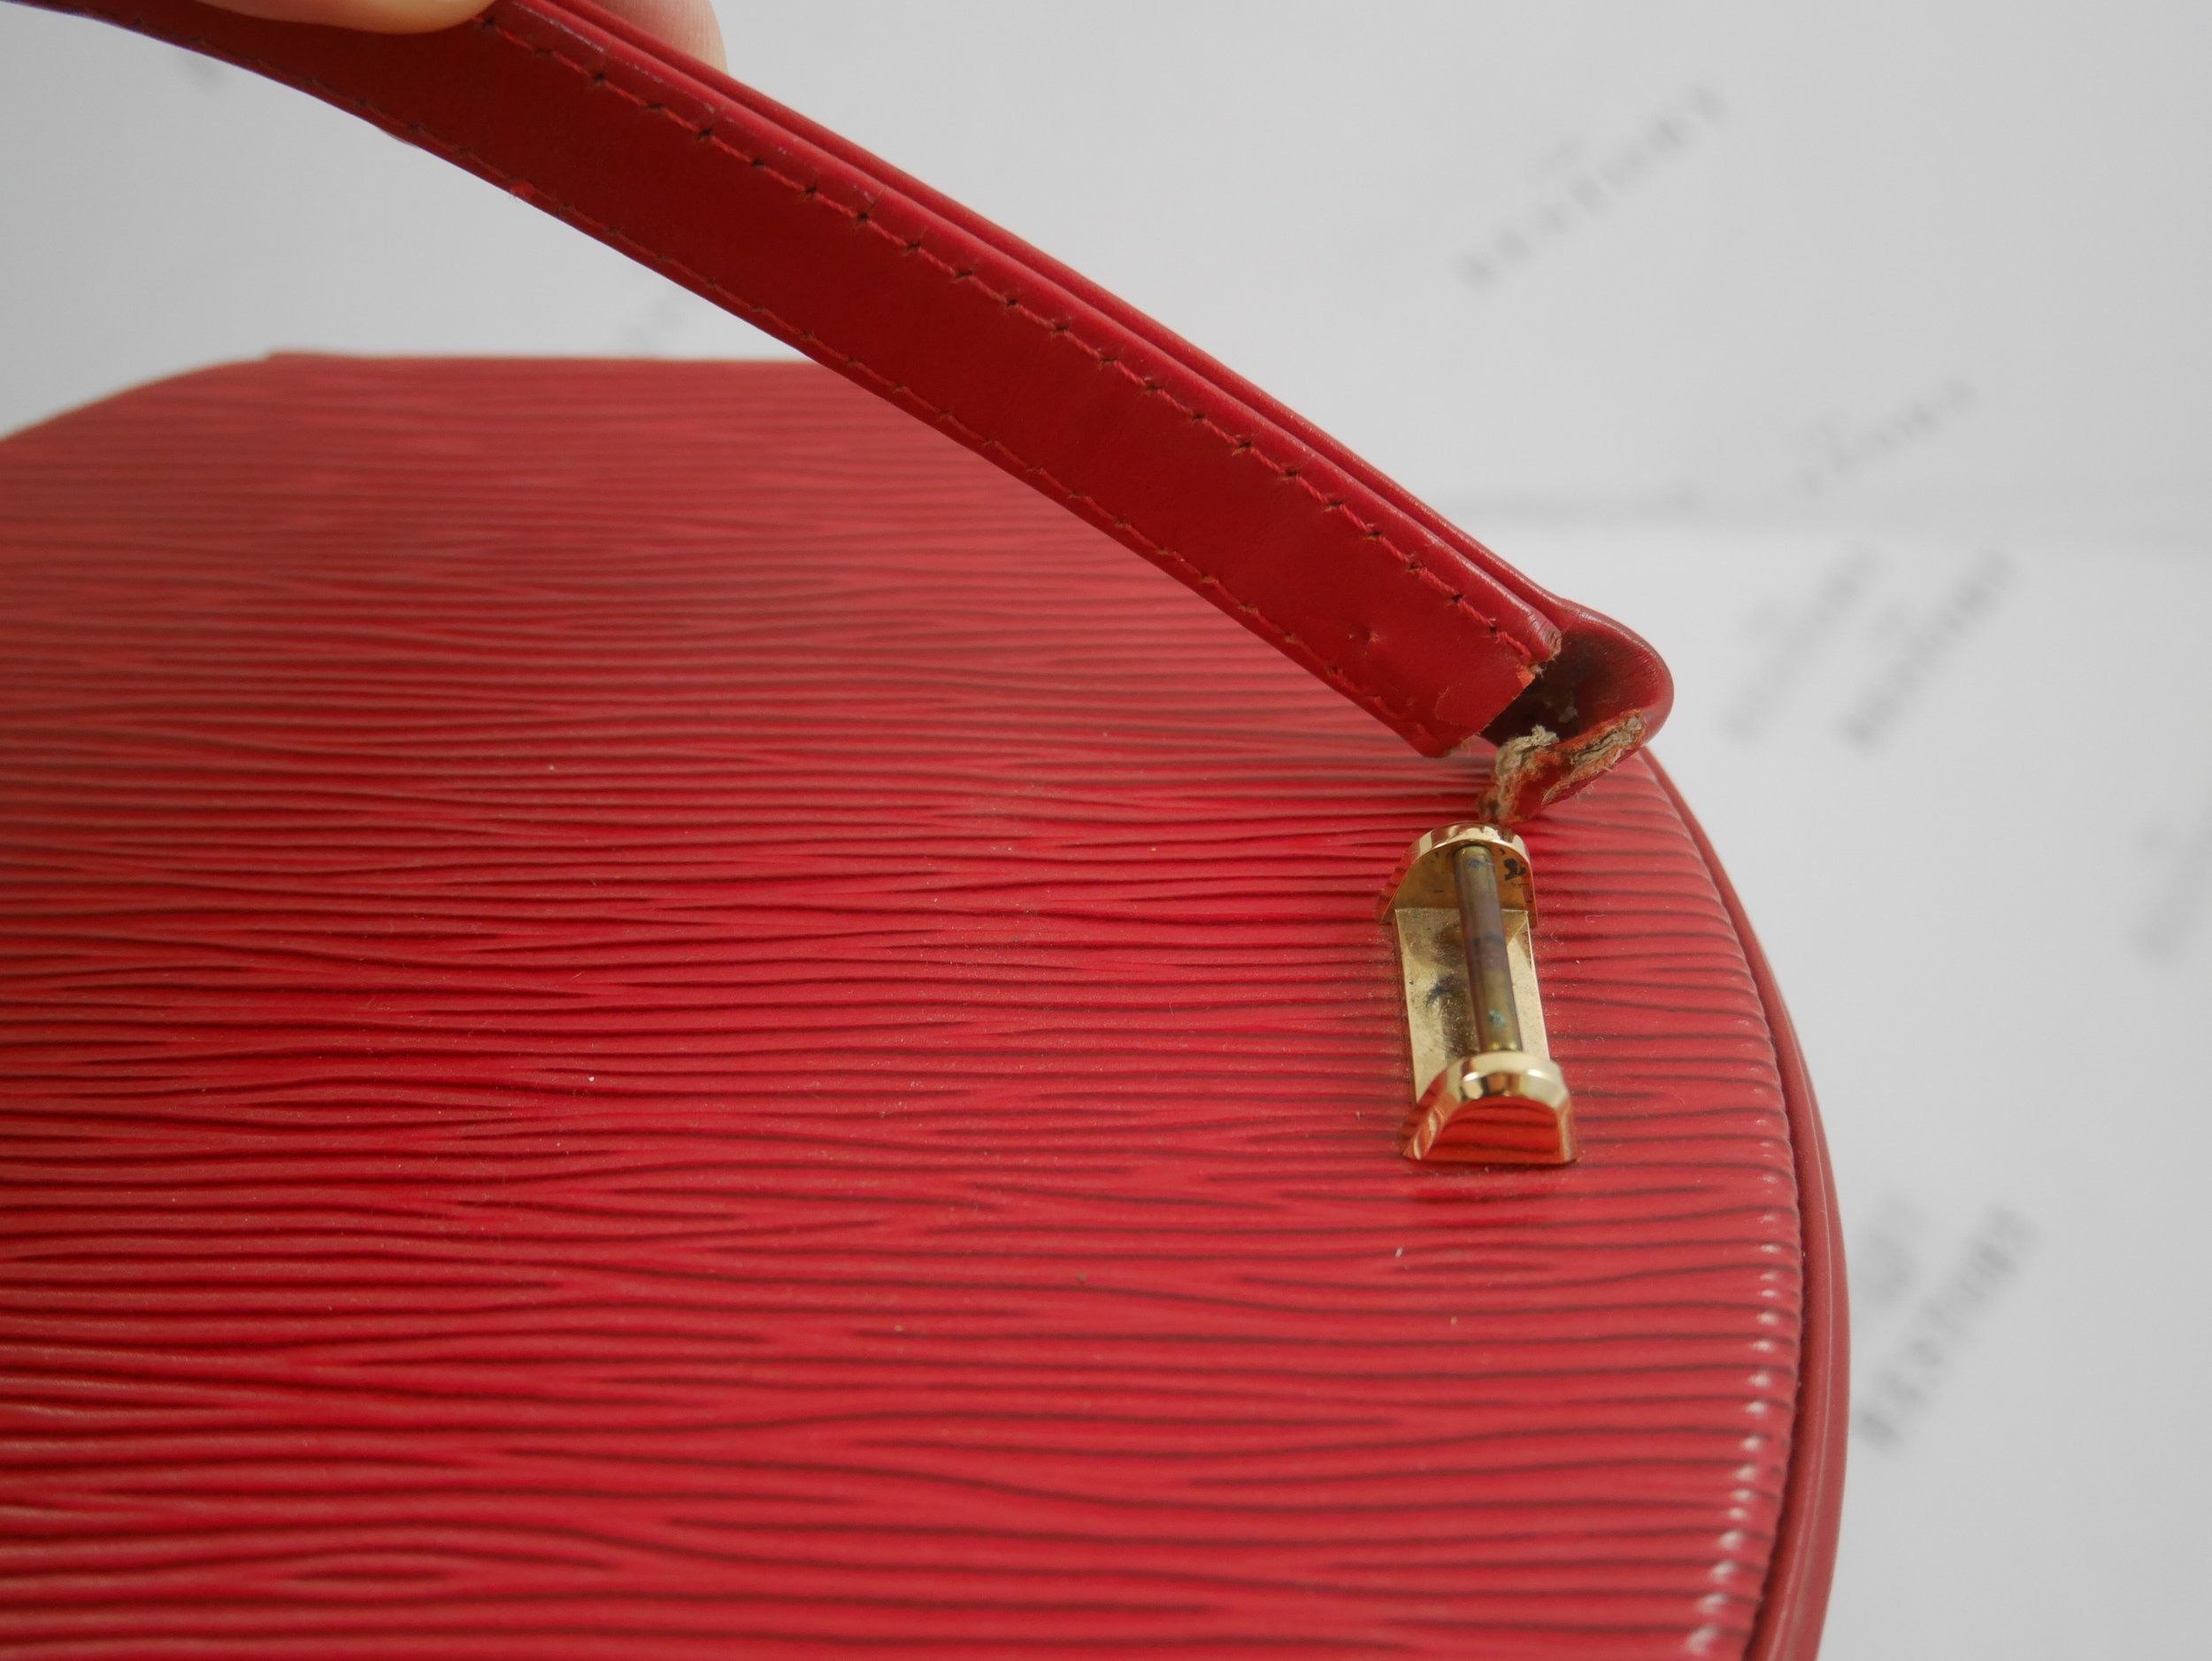 Inspired by @LouisVuitton's classic vanity case, the petite Cannes